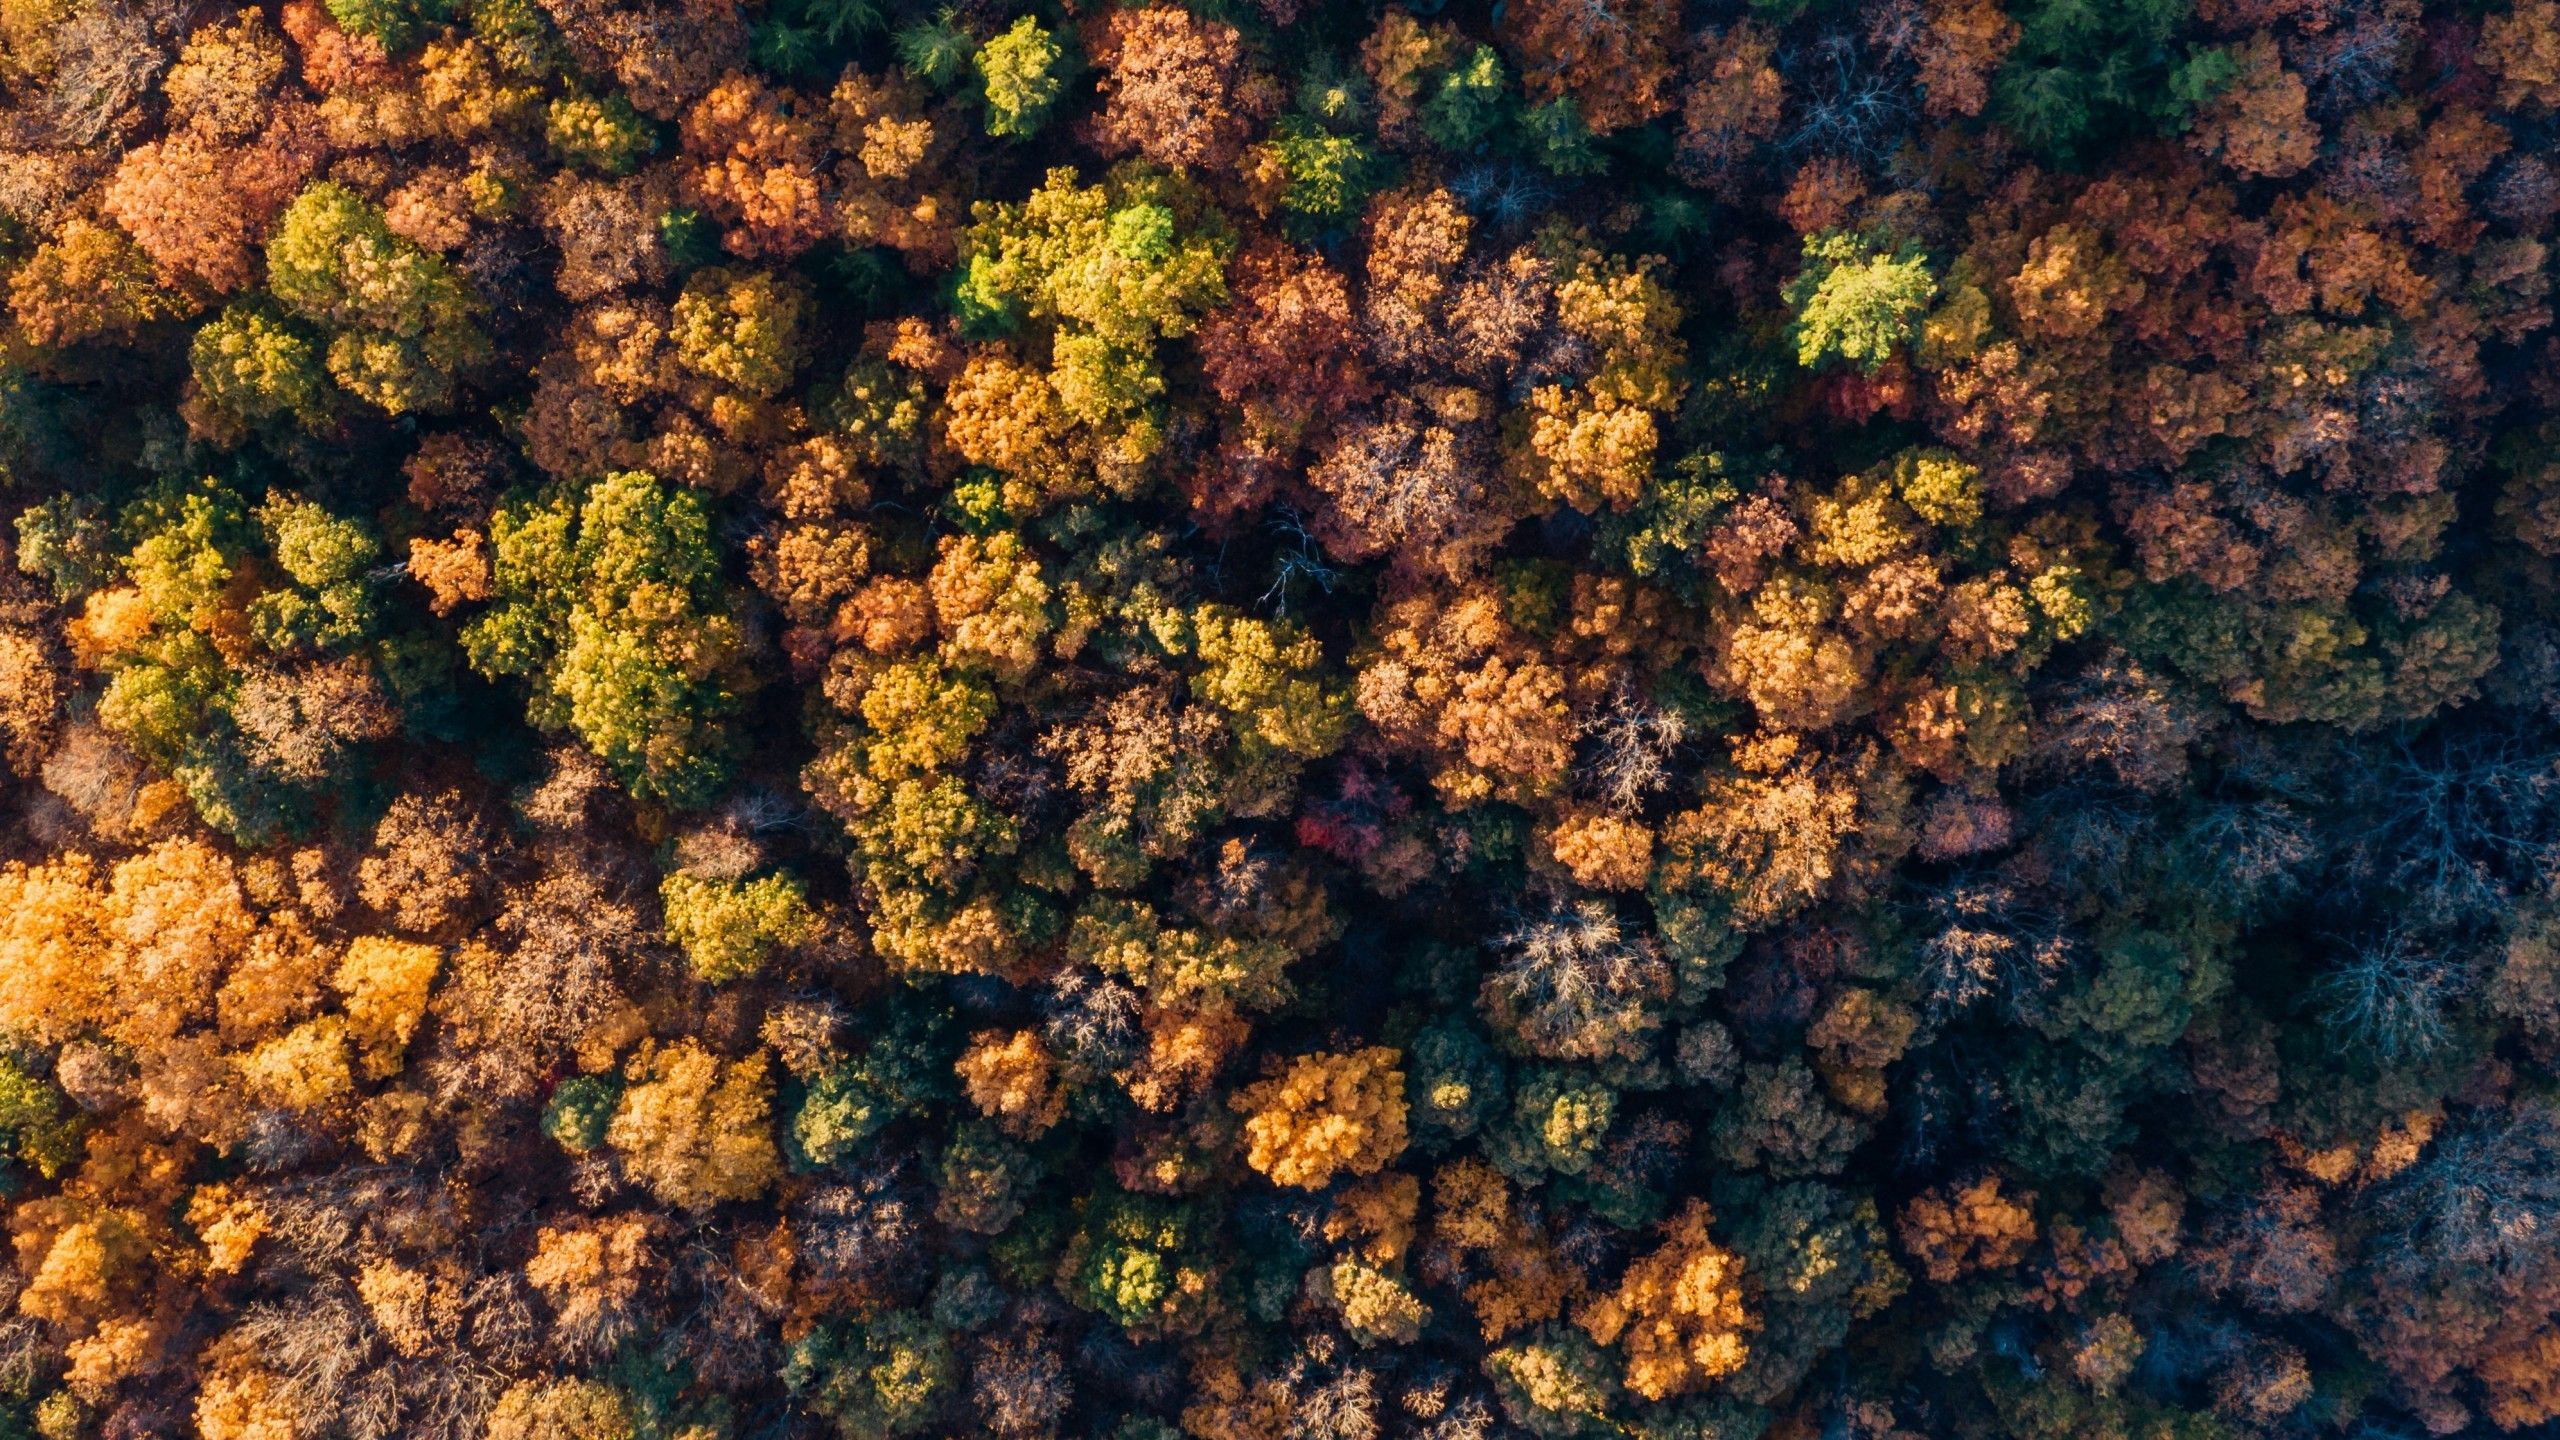 Download 2560x1440 Autumn, Forest, Top View, Aerial View, Drone Shot Wallpaper for iMac 27 inch